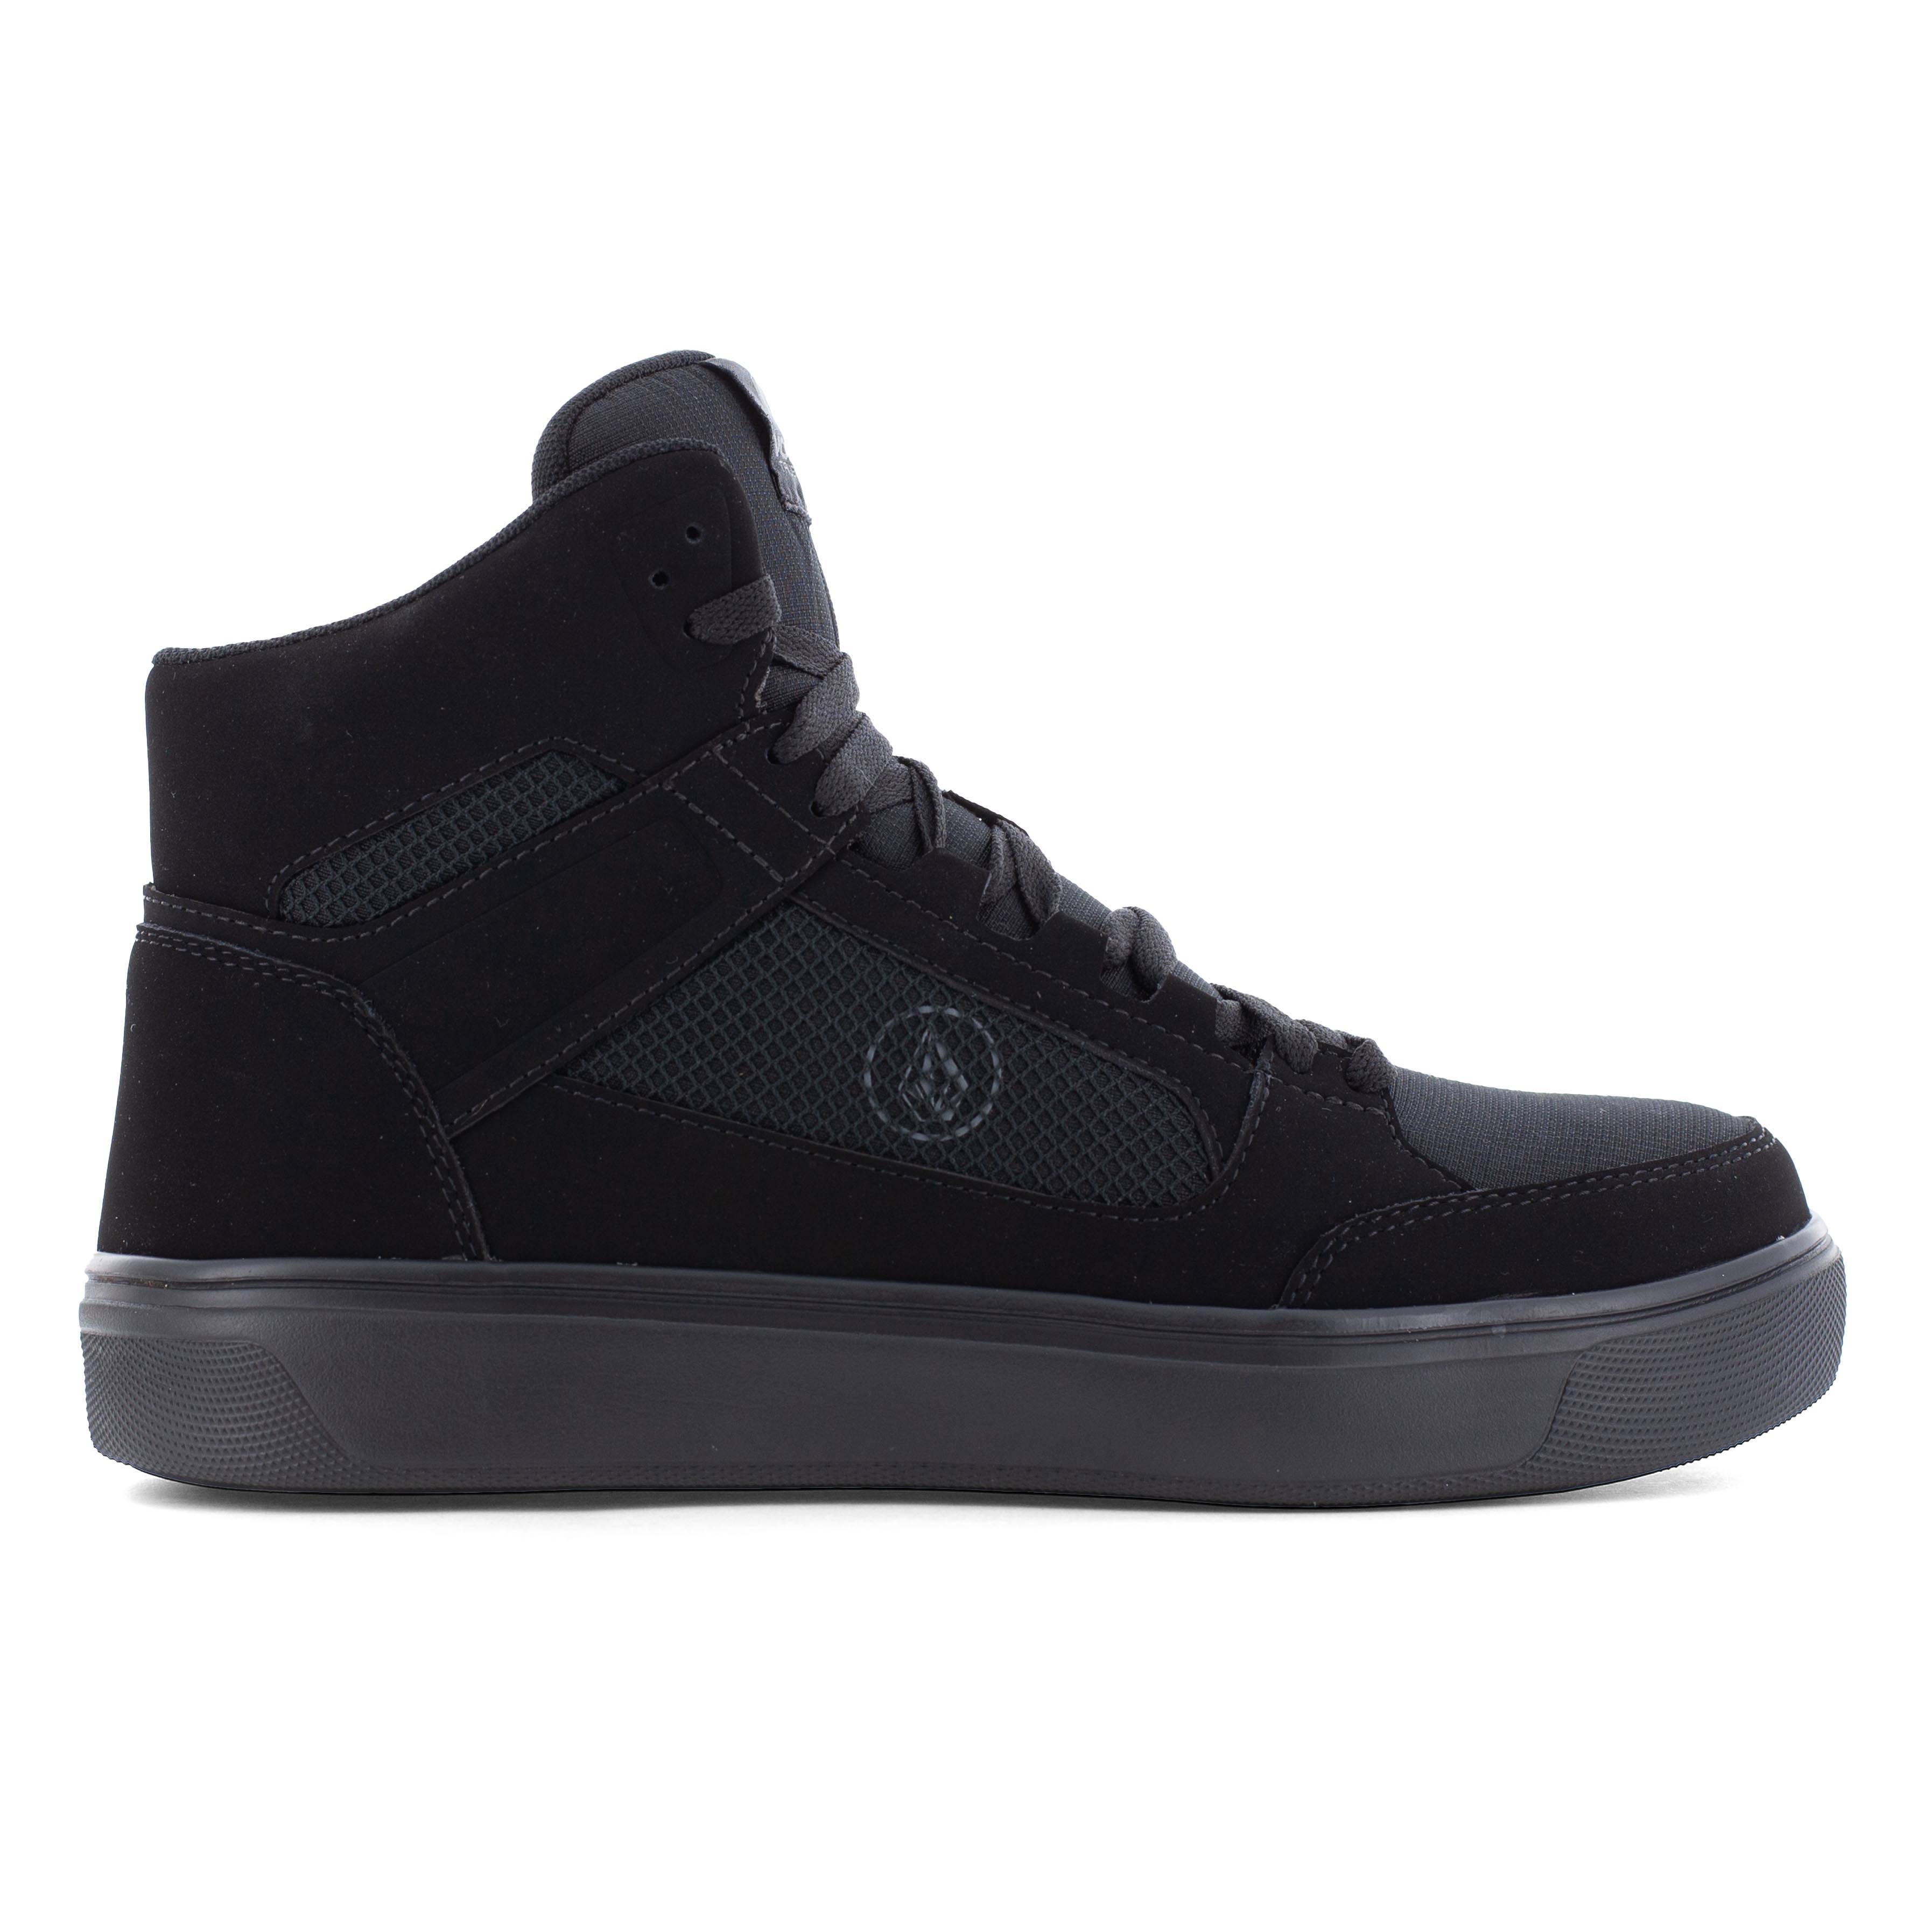 Volcom Workwear Evolve Composite Toe High Top Shoes